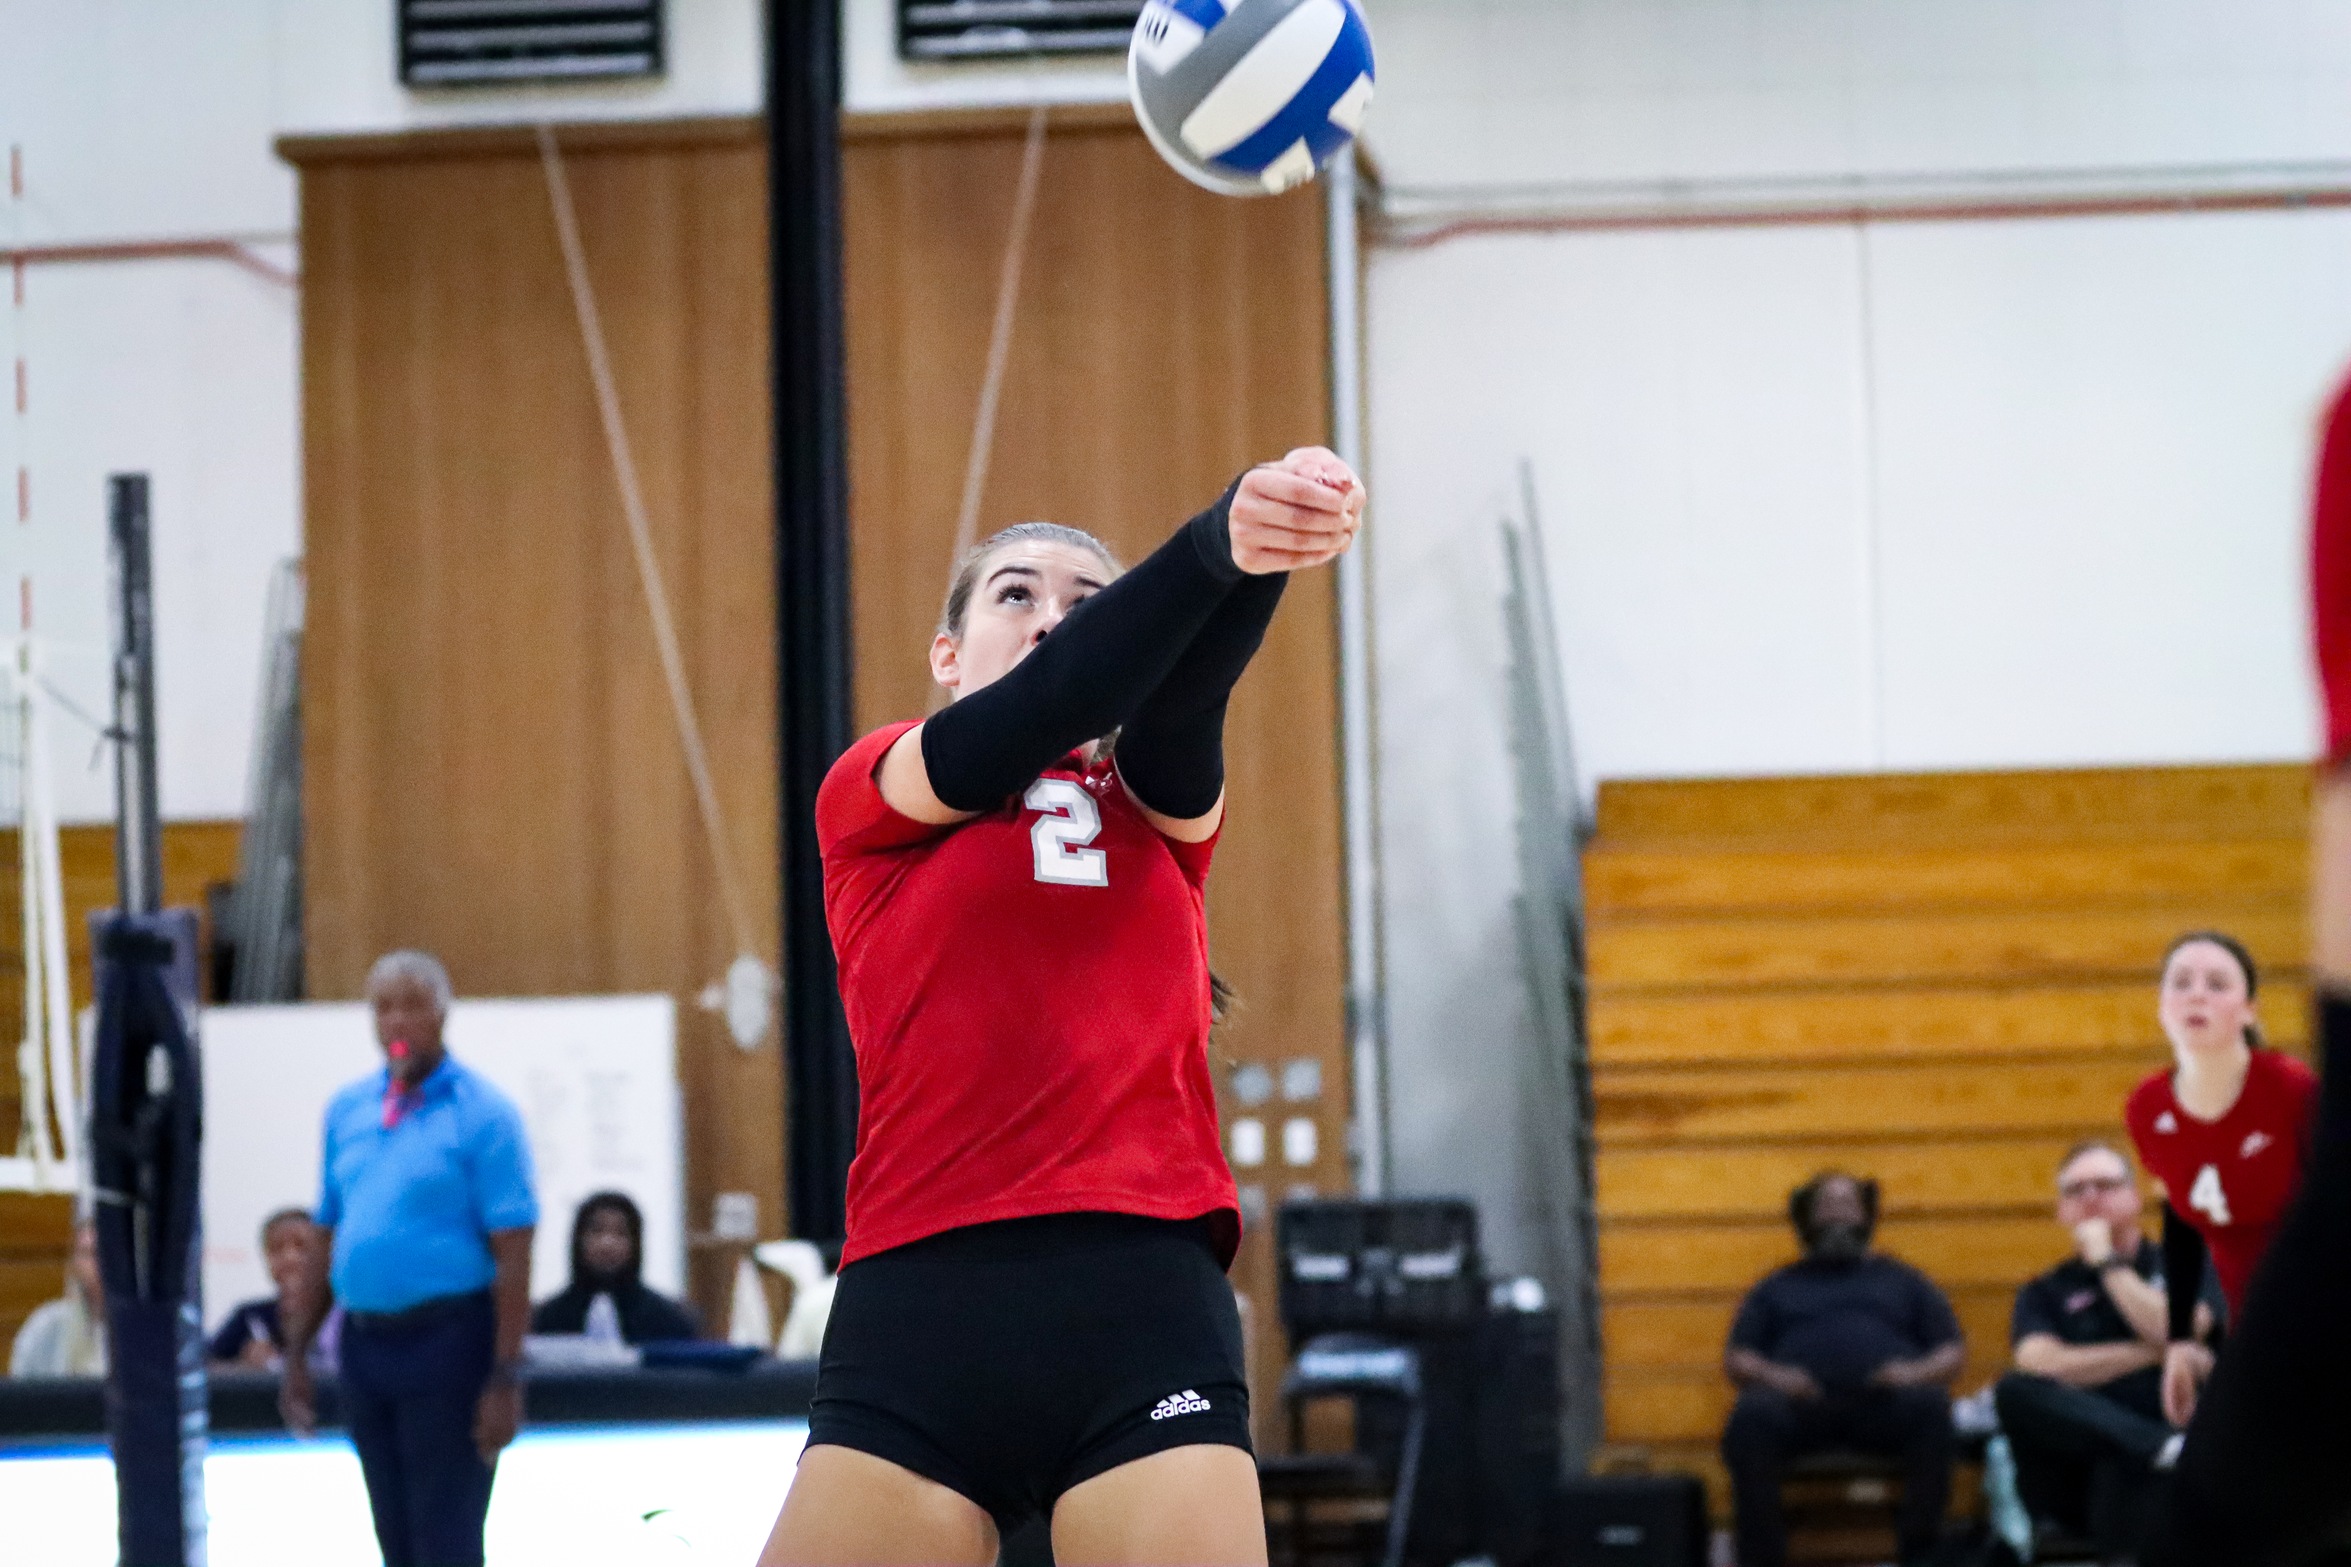 Mayara Swillens finished with night with seven digs and 22 assists. Photo by Cara Heise.